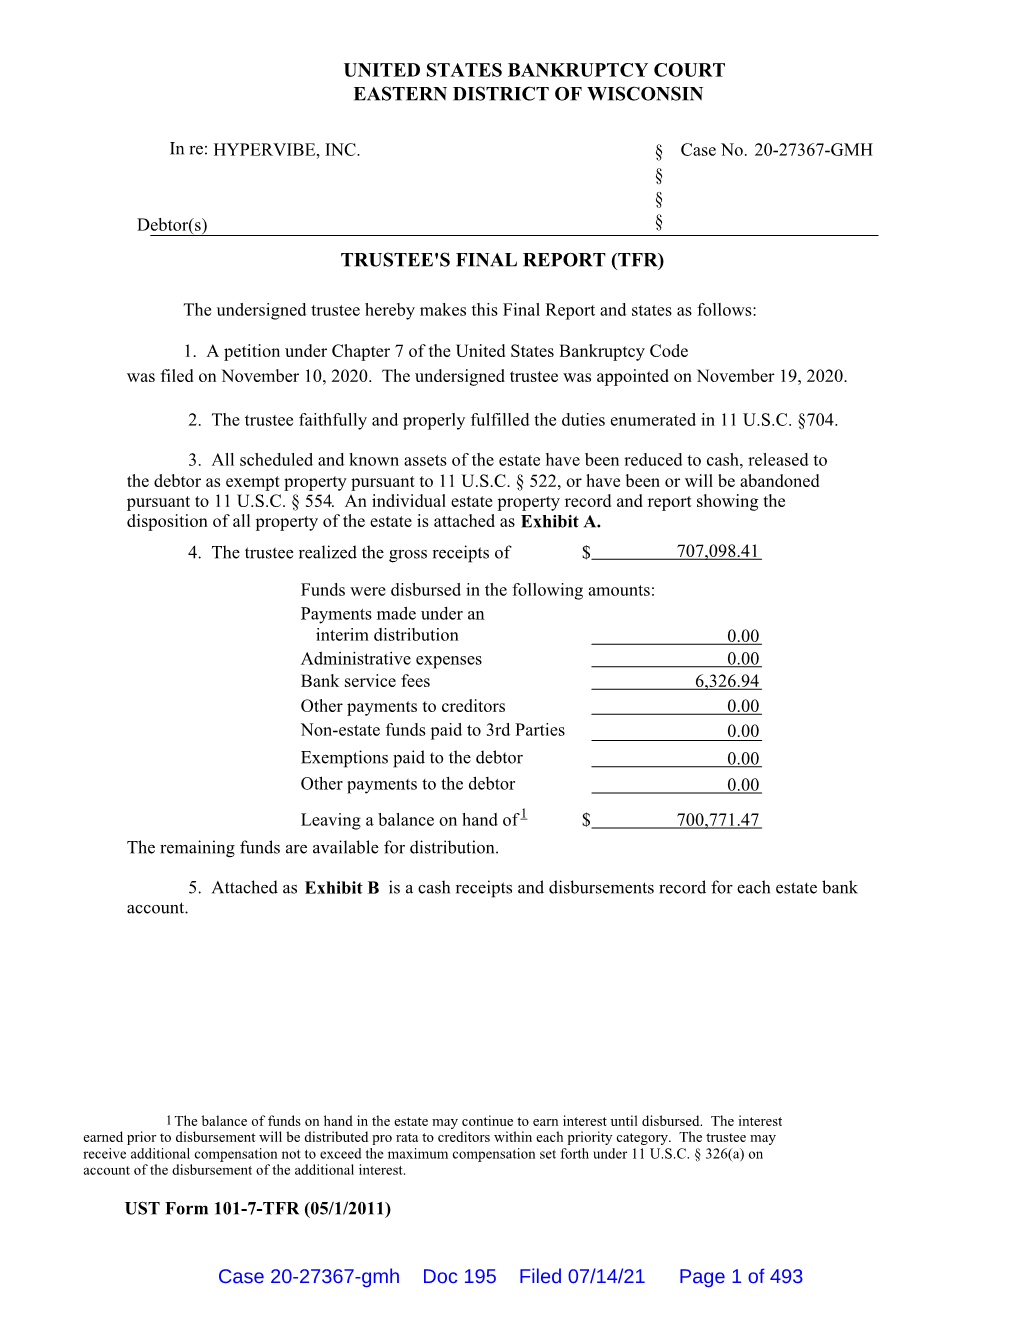 UNITED STATES BANKRUPTCY COURT EASTERN DISTRICT of WISCONSIN TRUSTEE's FINAL REPORT (TFR) Case 20-27367-Gmh Doc 195 Filed